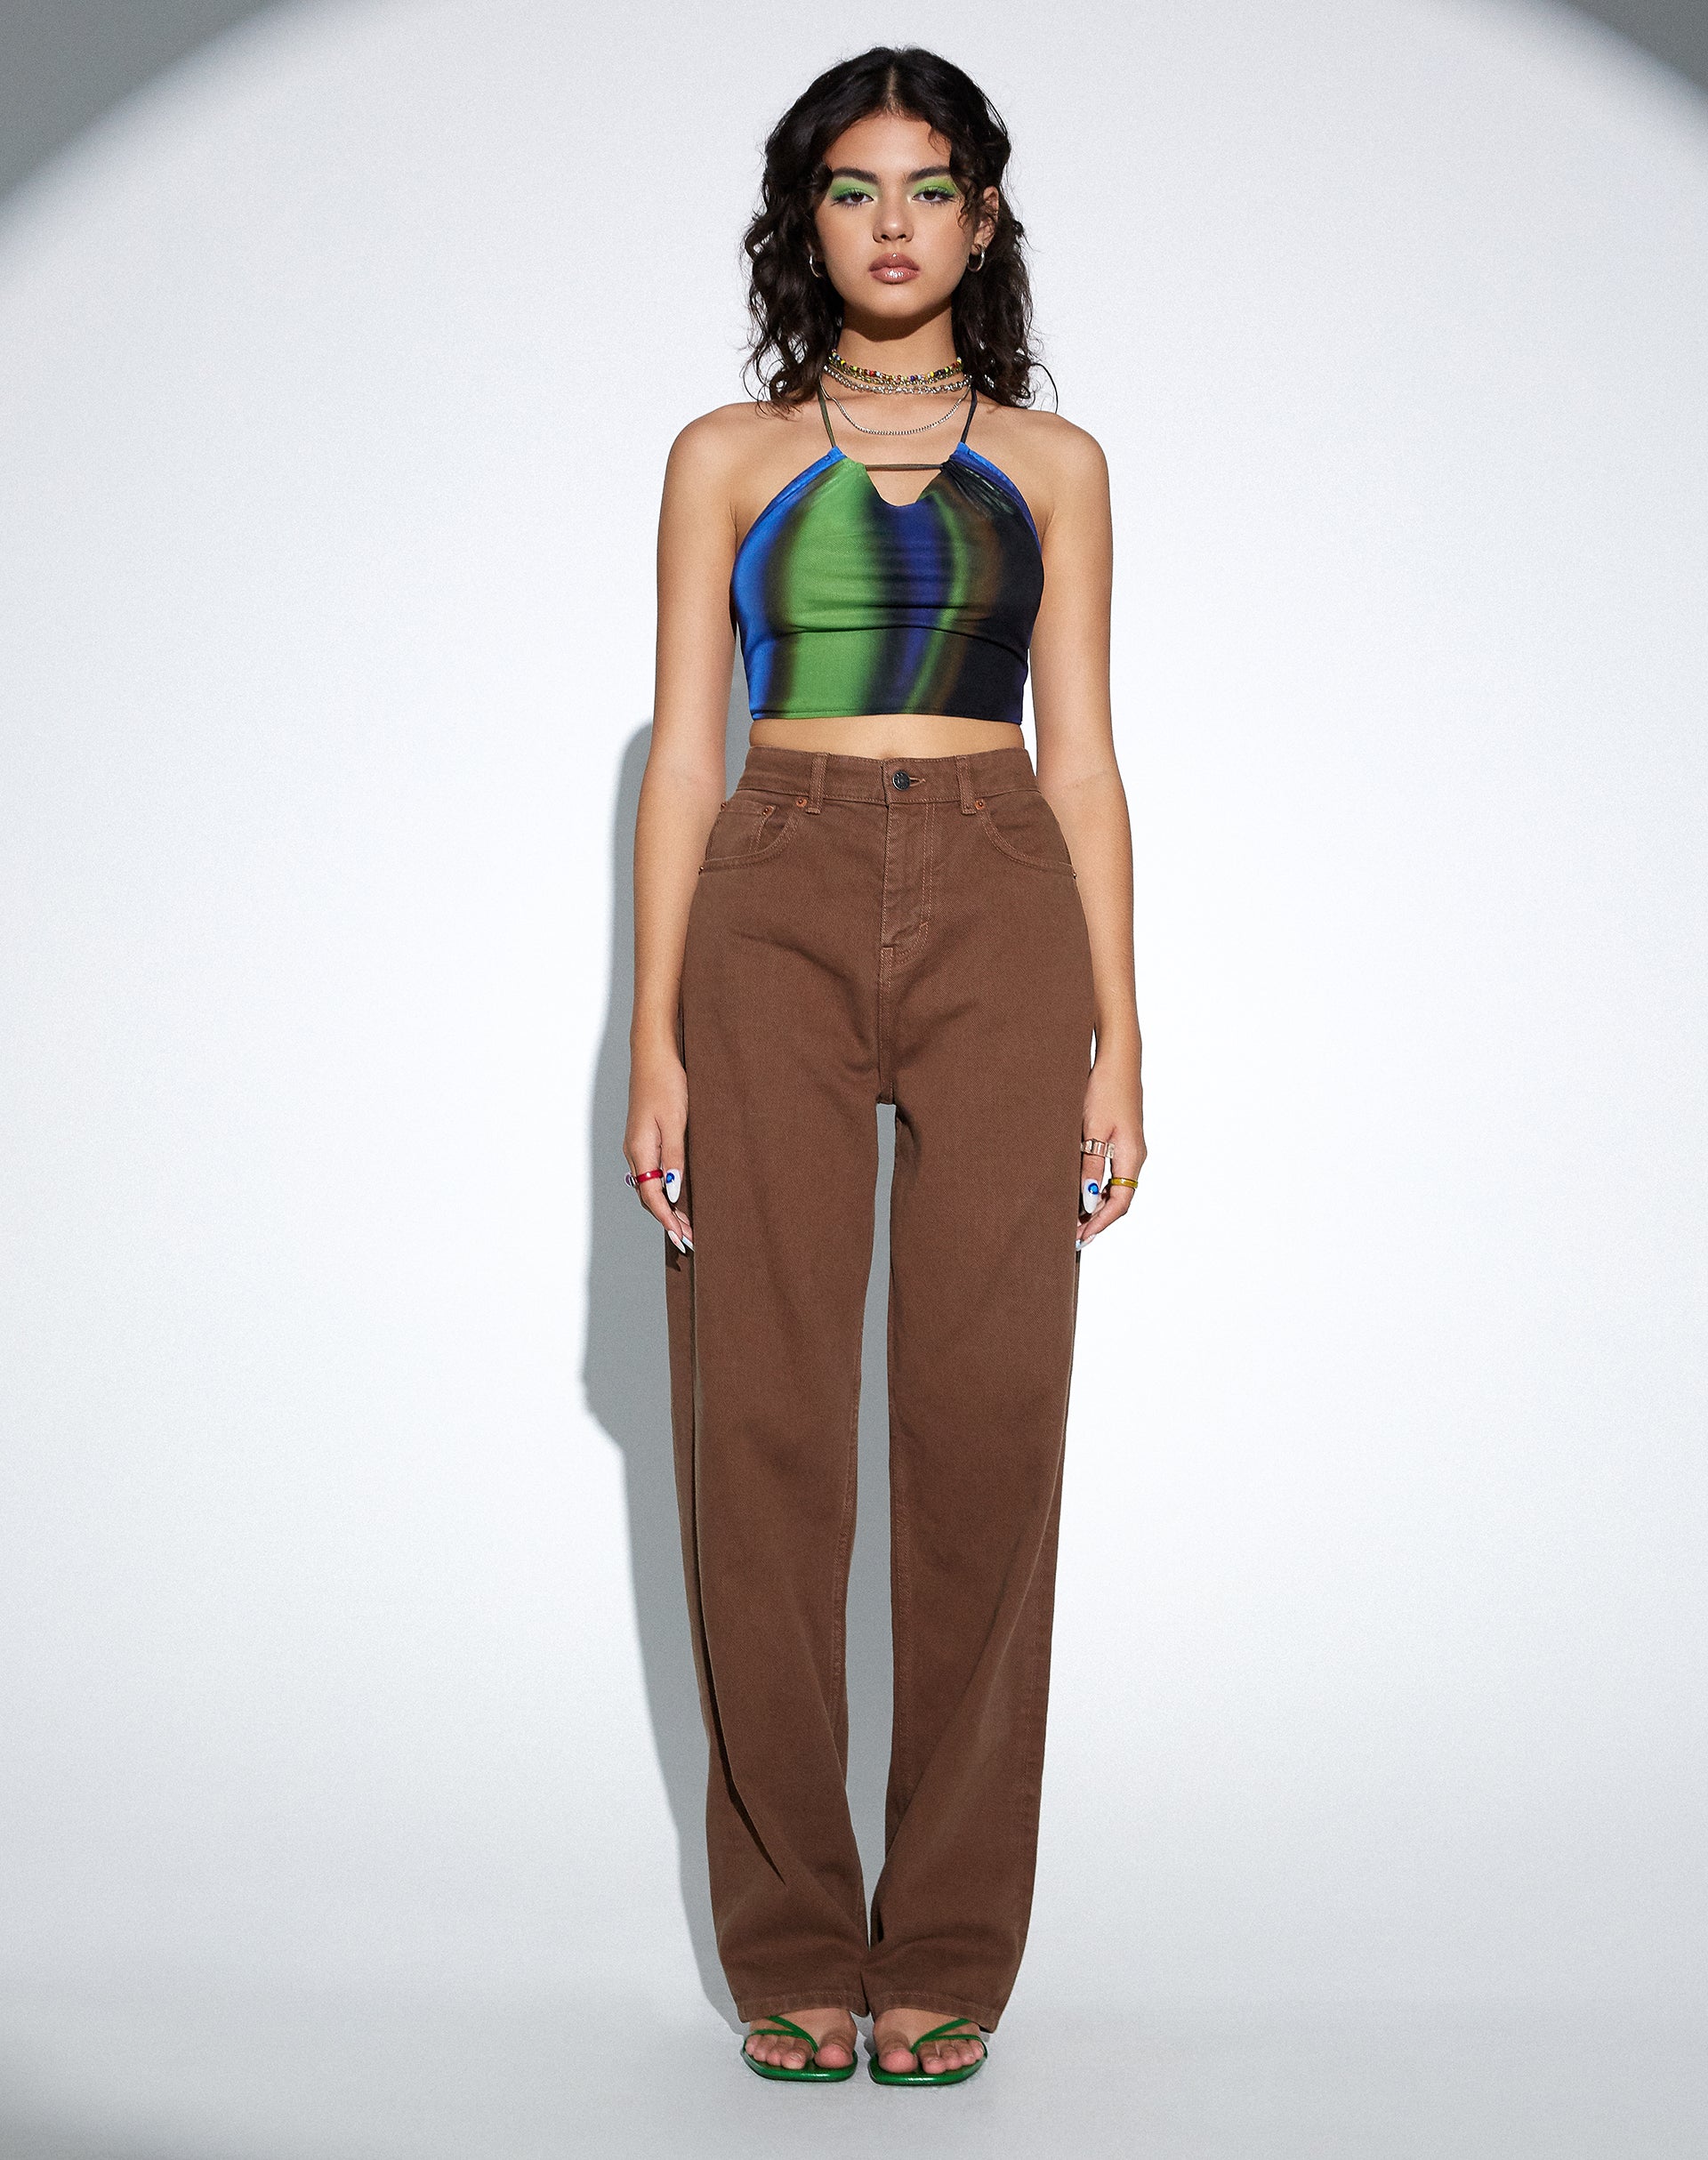 Image of MOTEL X OLIVIA NEILL Parallel Jeans in Rich Brown